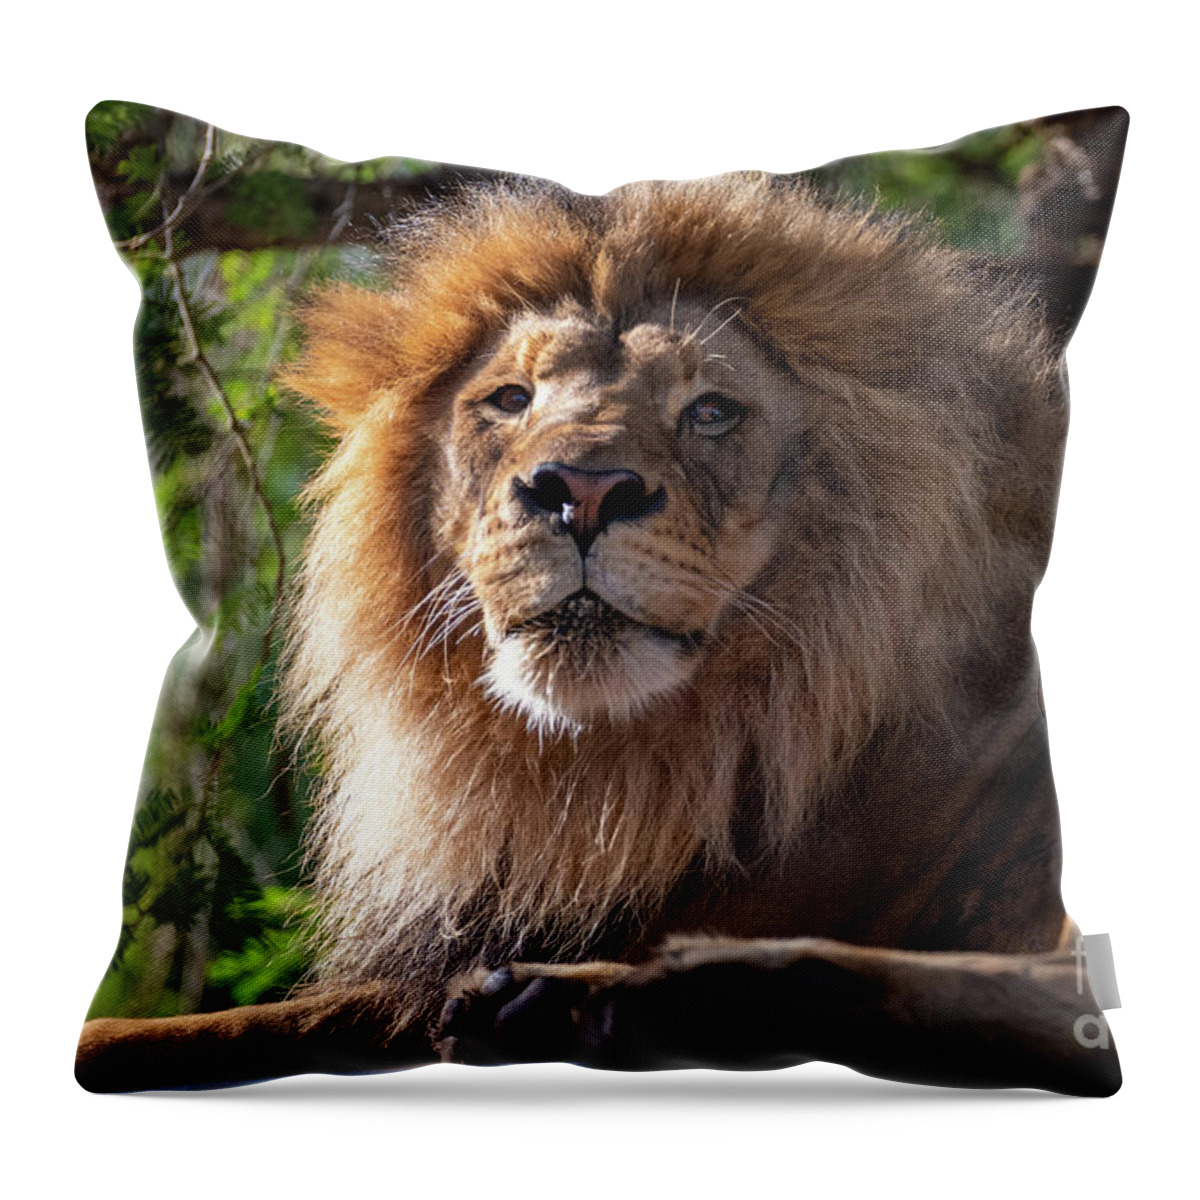 David Levin Photography Throw Pillow featuring the photograph I'm Looking at You by David Levin